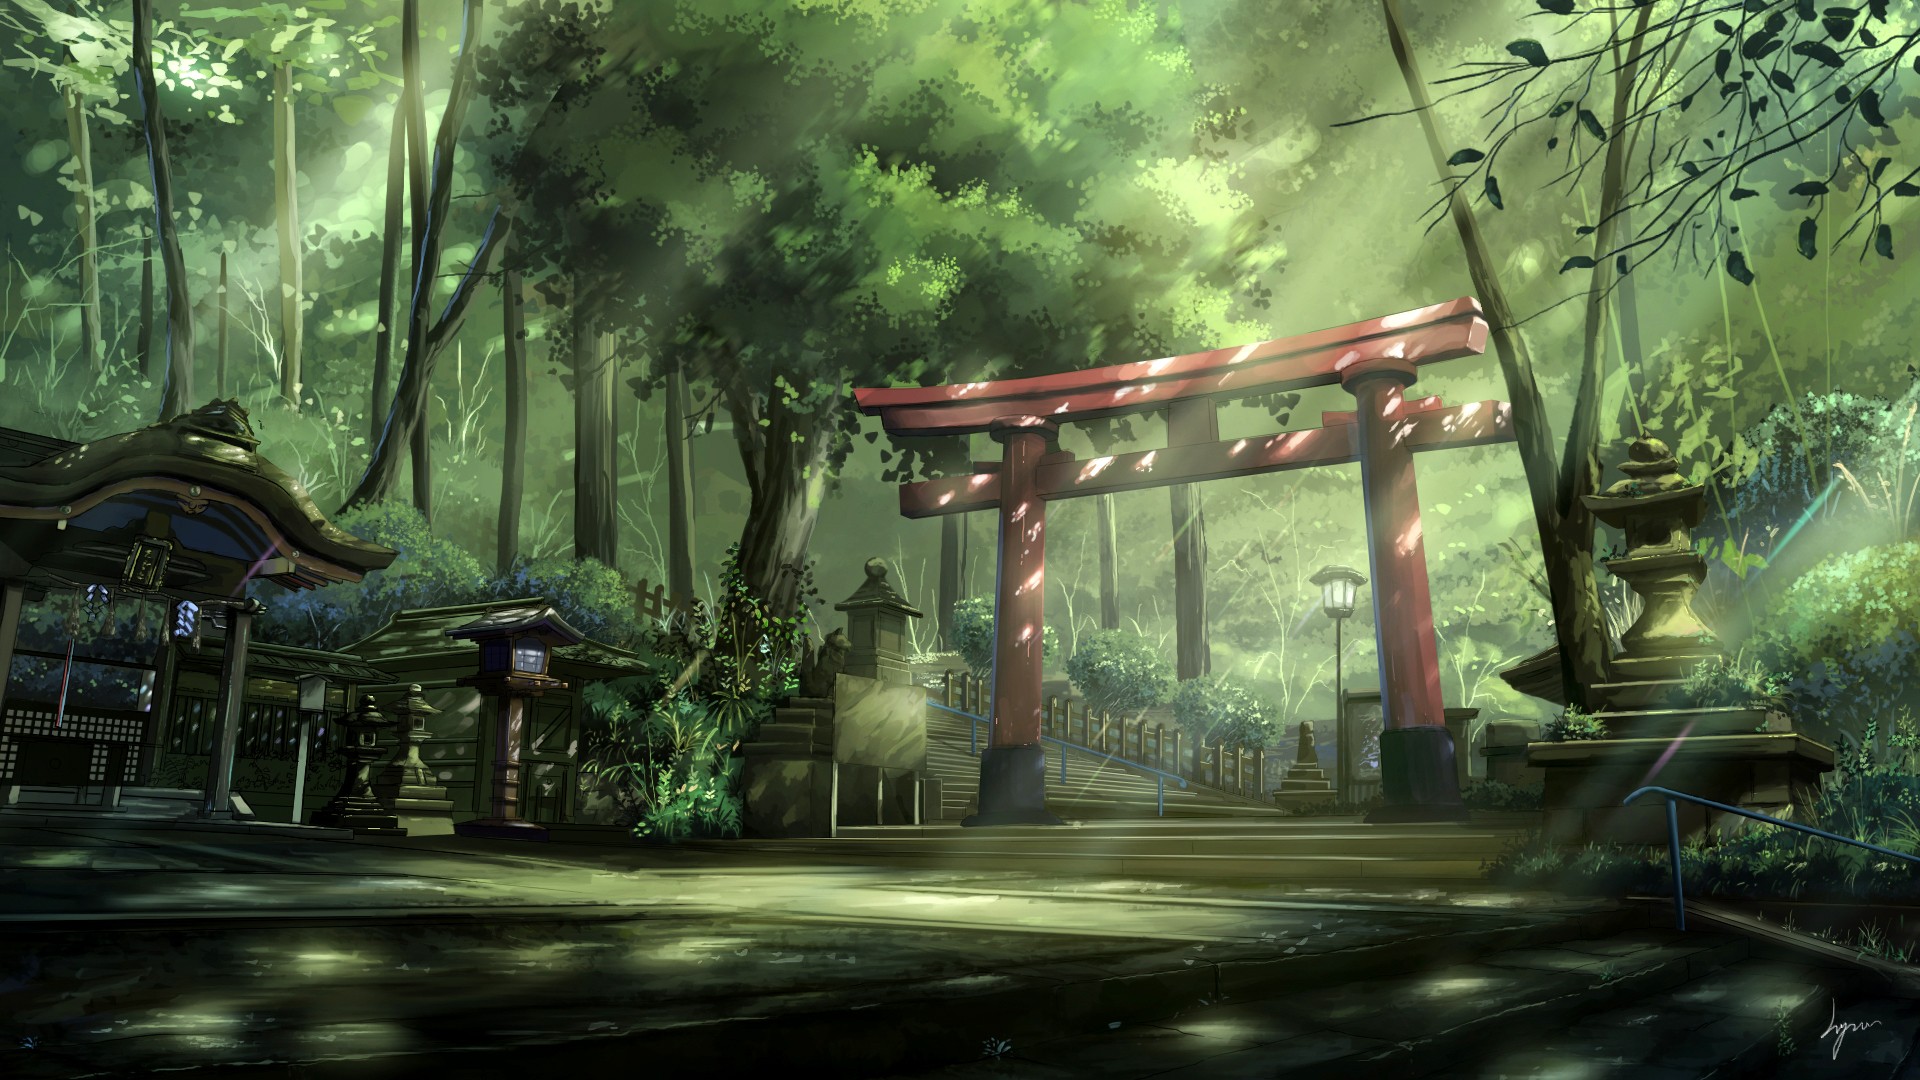 Anime 1920x1080 anime landscape torii sun rays forest Asian architecture steps trees fantasy art Asia temple